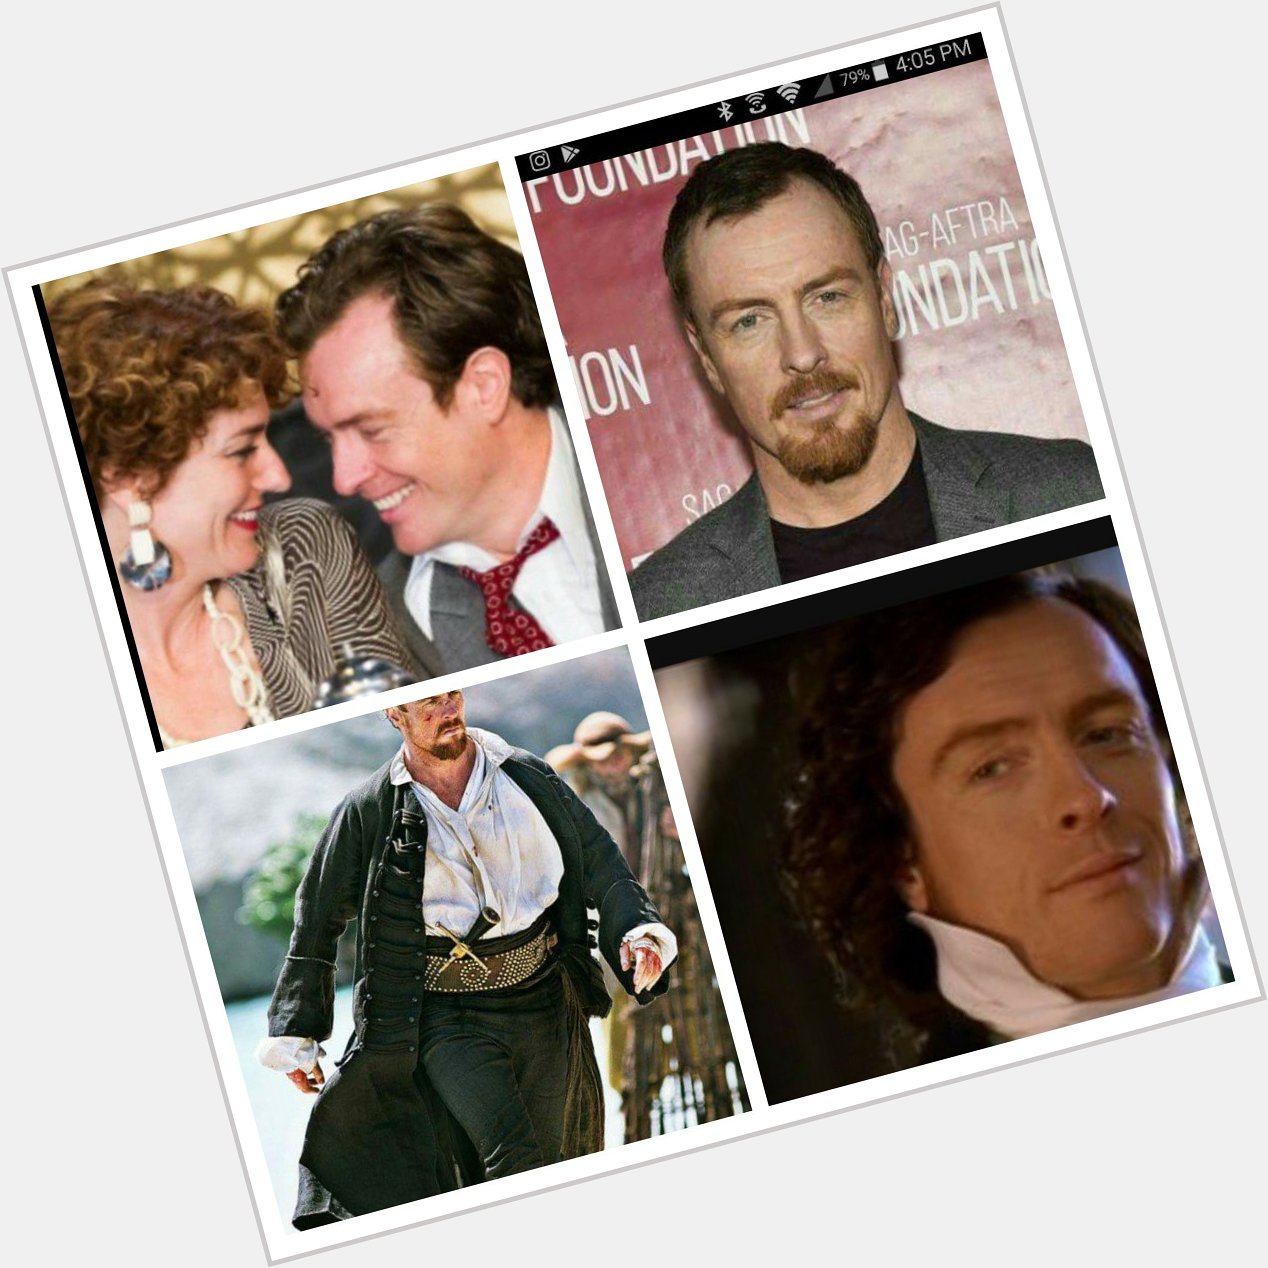 Its your day Toby Stephens for wonderful surprises and celebration Happy birthday to you Toby    